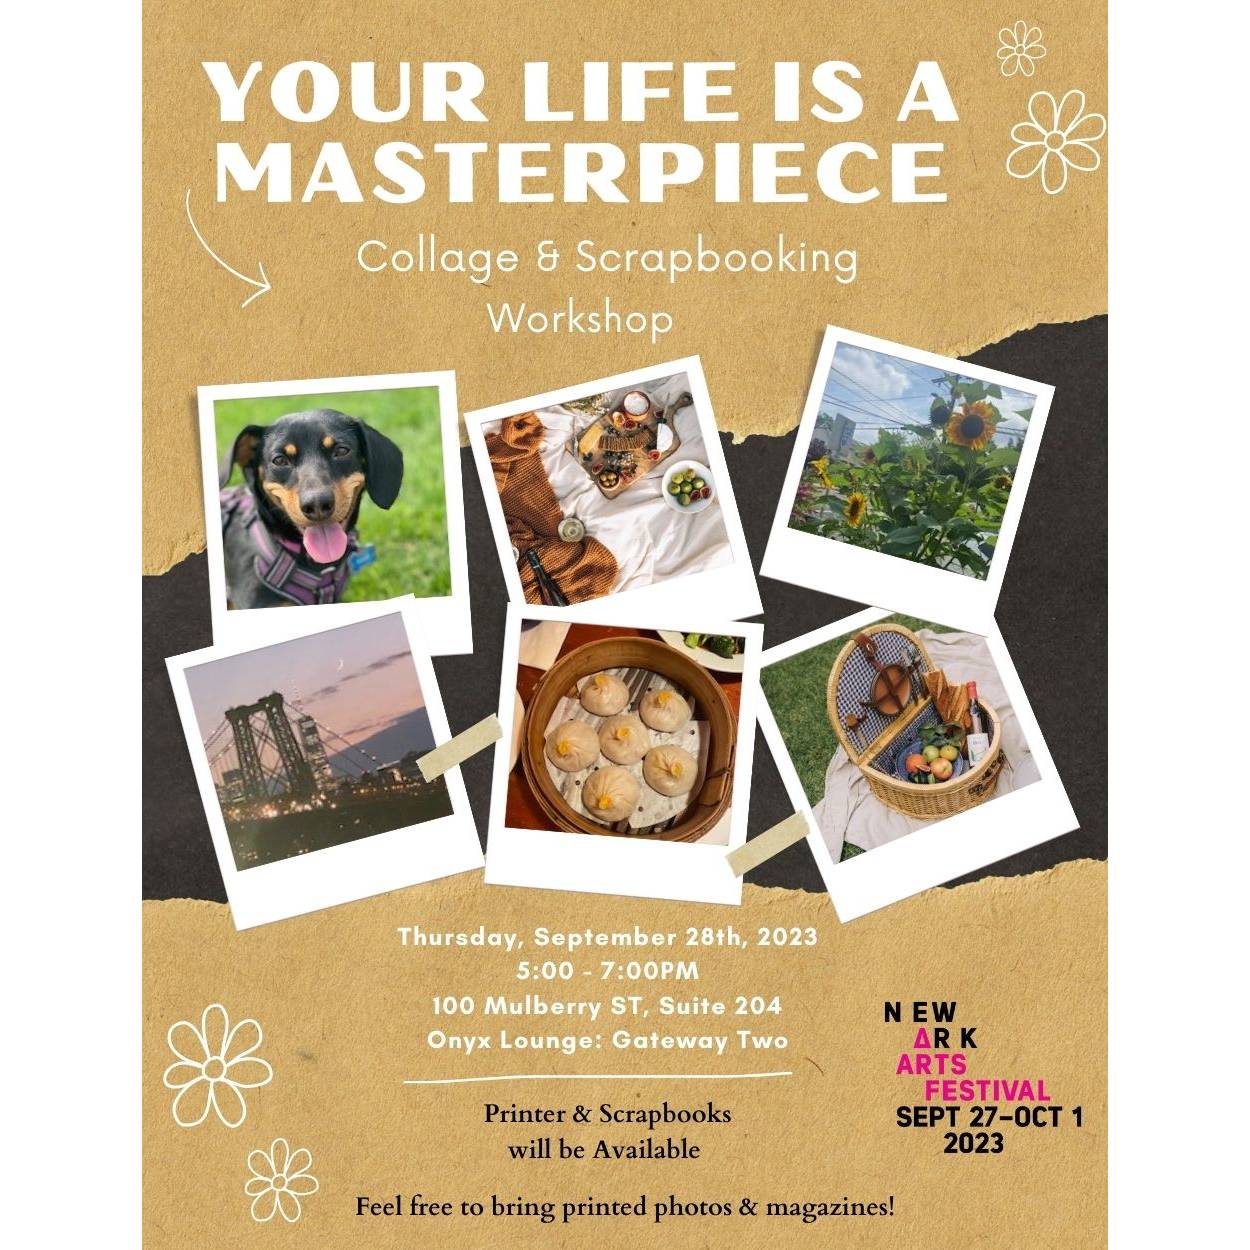 Your Life is a Masterpiece: Collage and Scrapbooking Workshop promo image